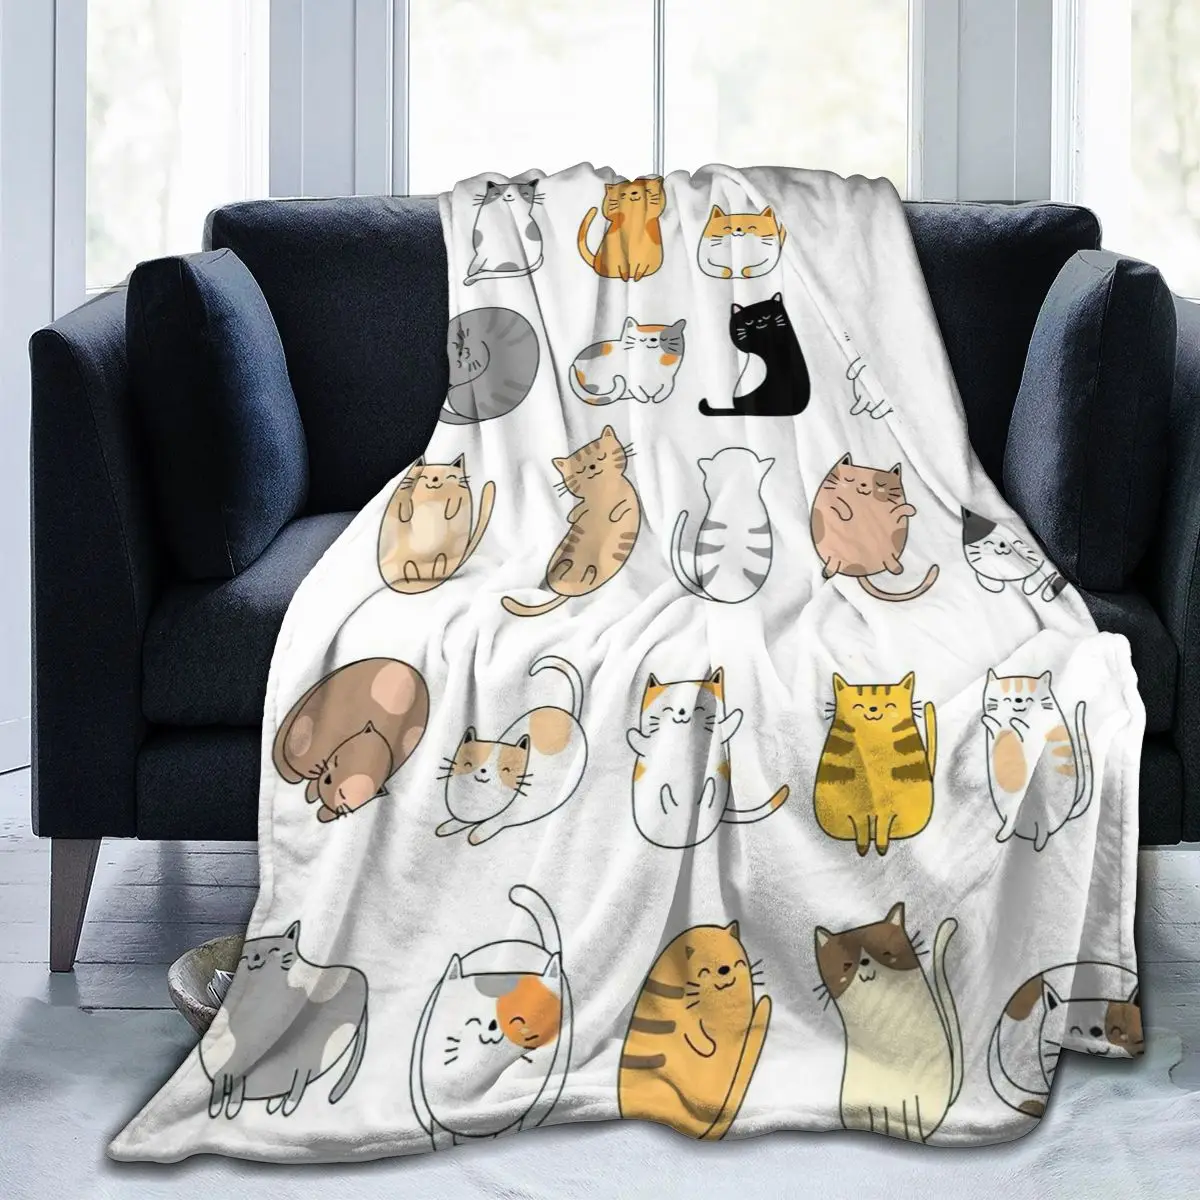 

Ultra Soft Sofa Blanket Cover Blanket Cartoon Cartoon Bedding Flannel plied Sofa Bedroom Decor for Children and Adults 278698865